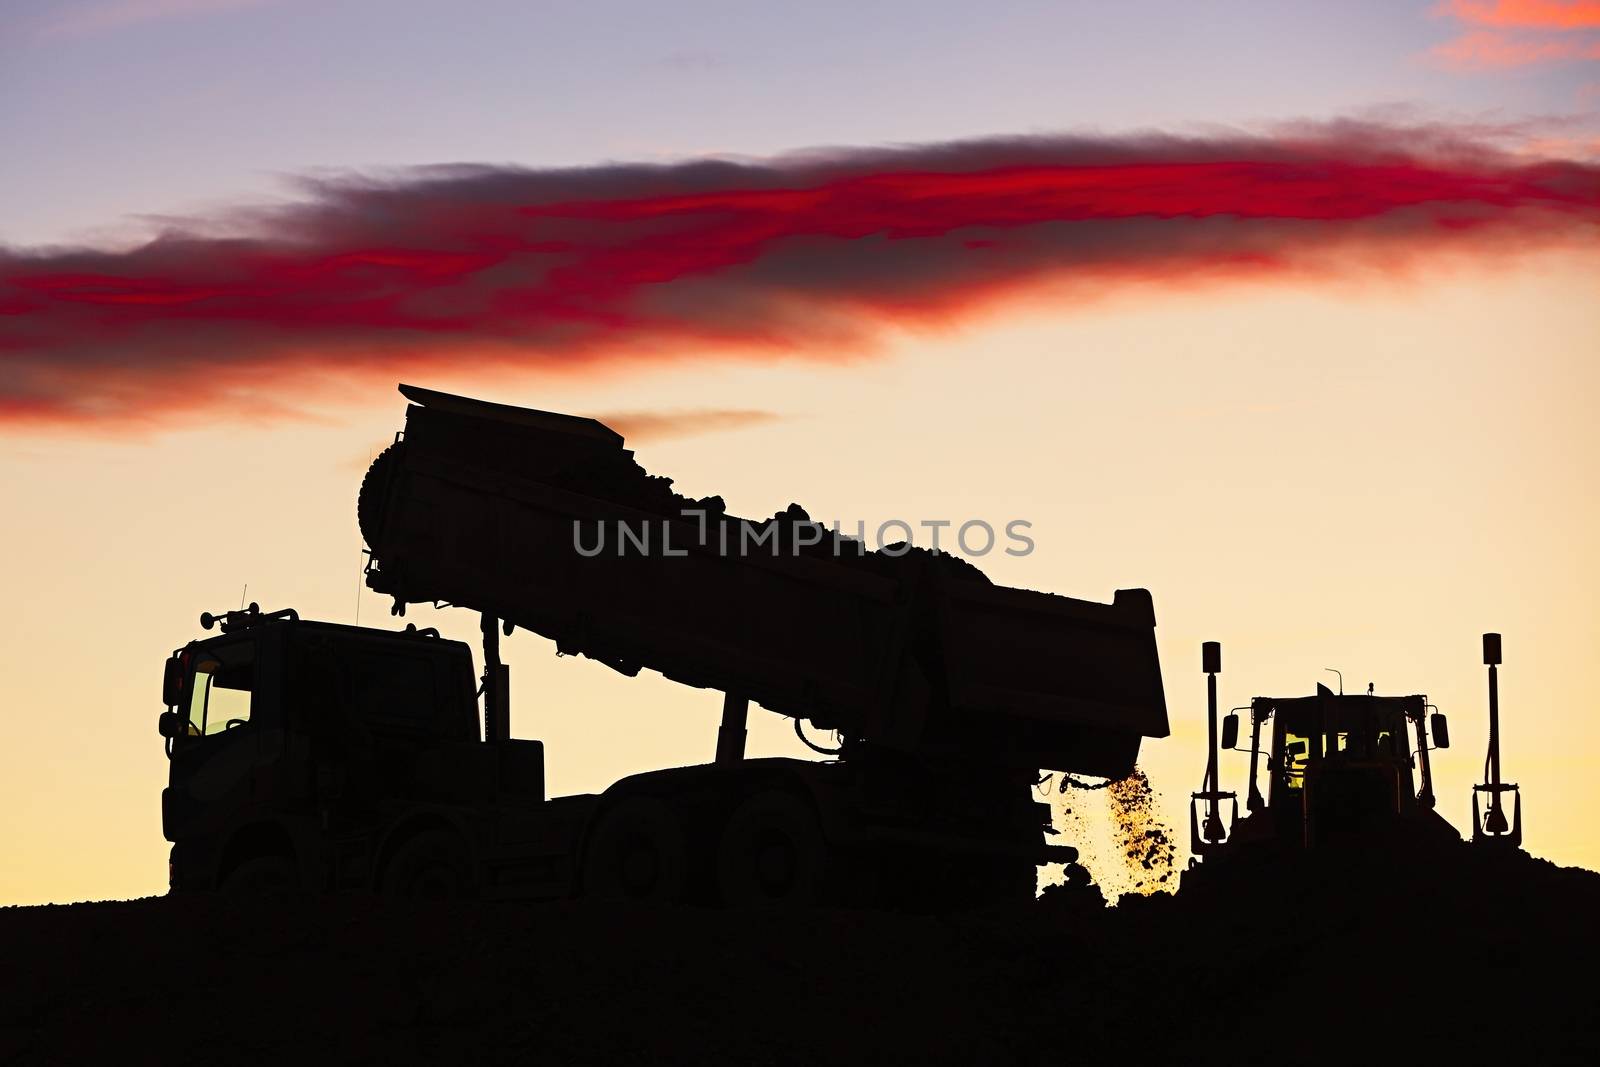 Silhouette of the truck in the building site